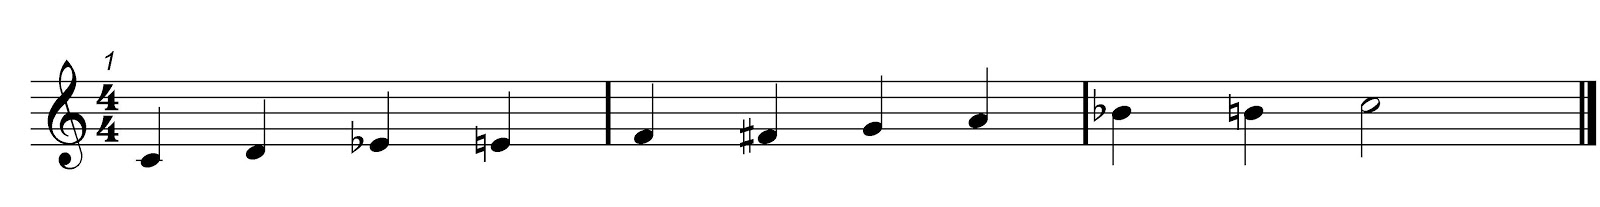 Ex 6 with the chromatic notes